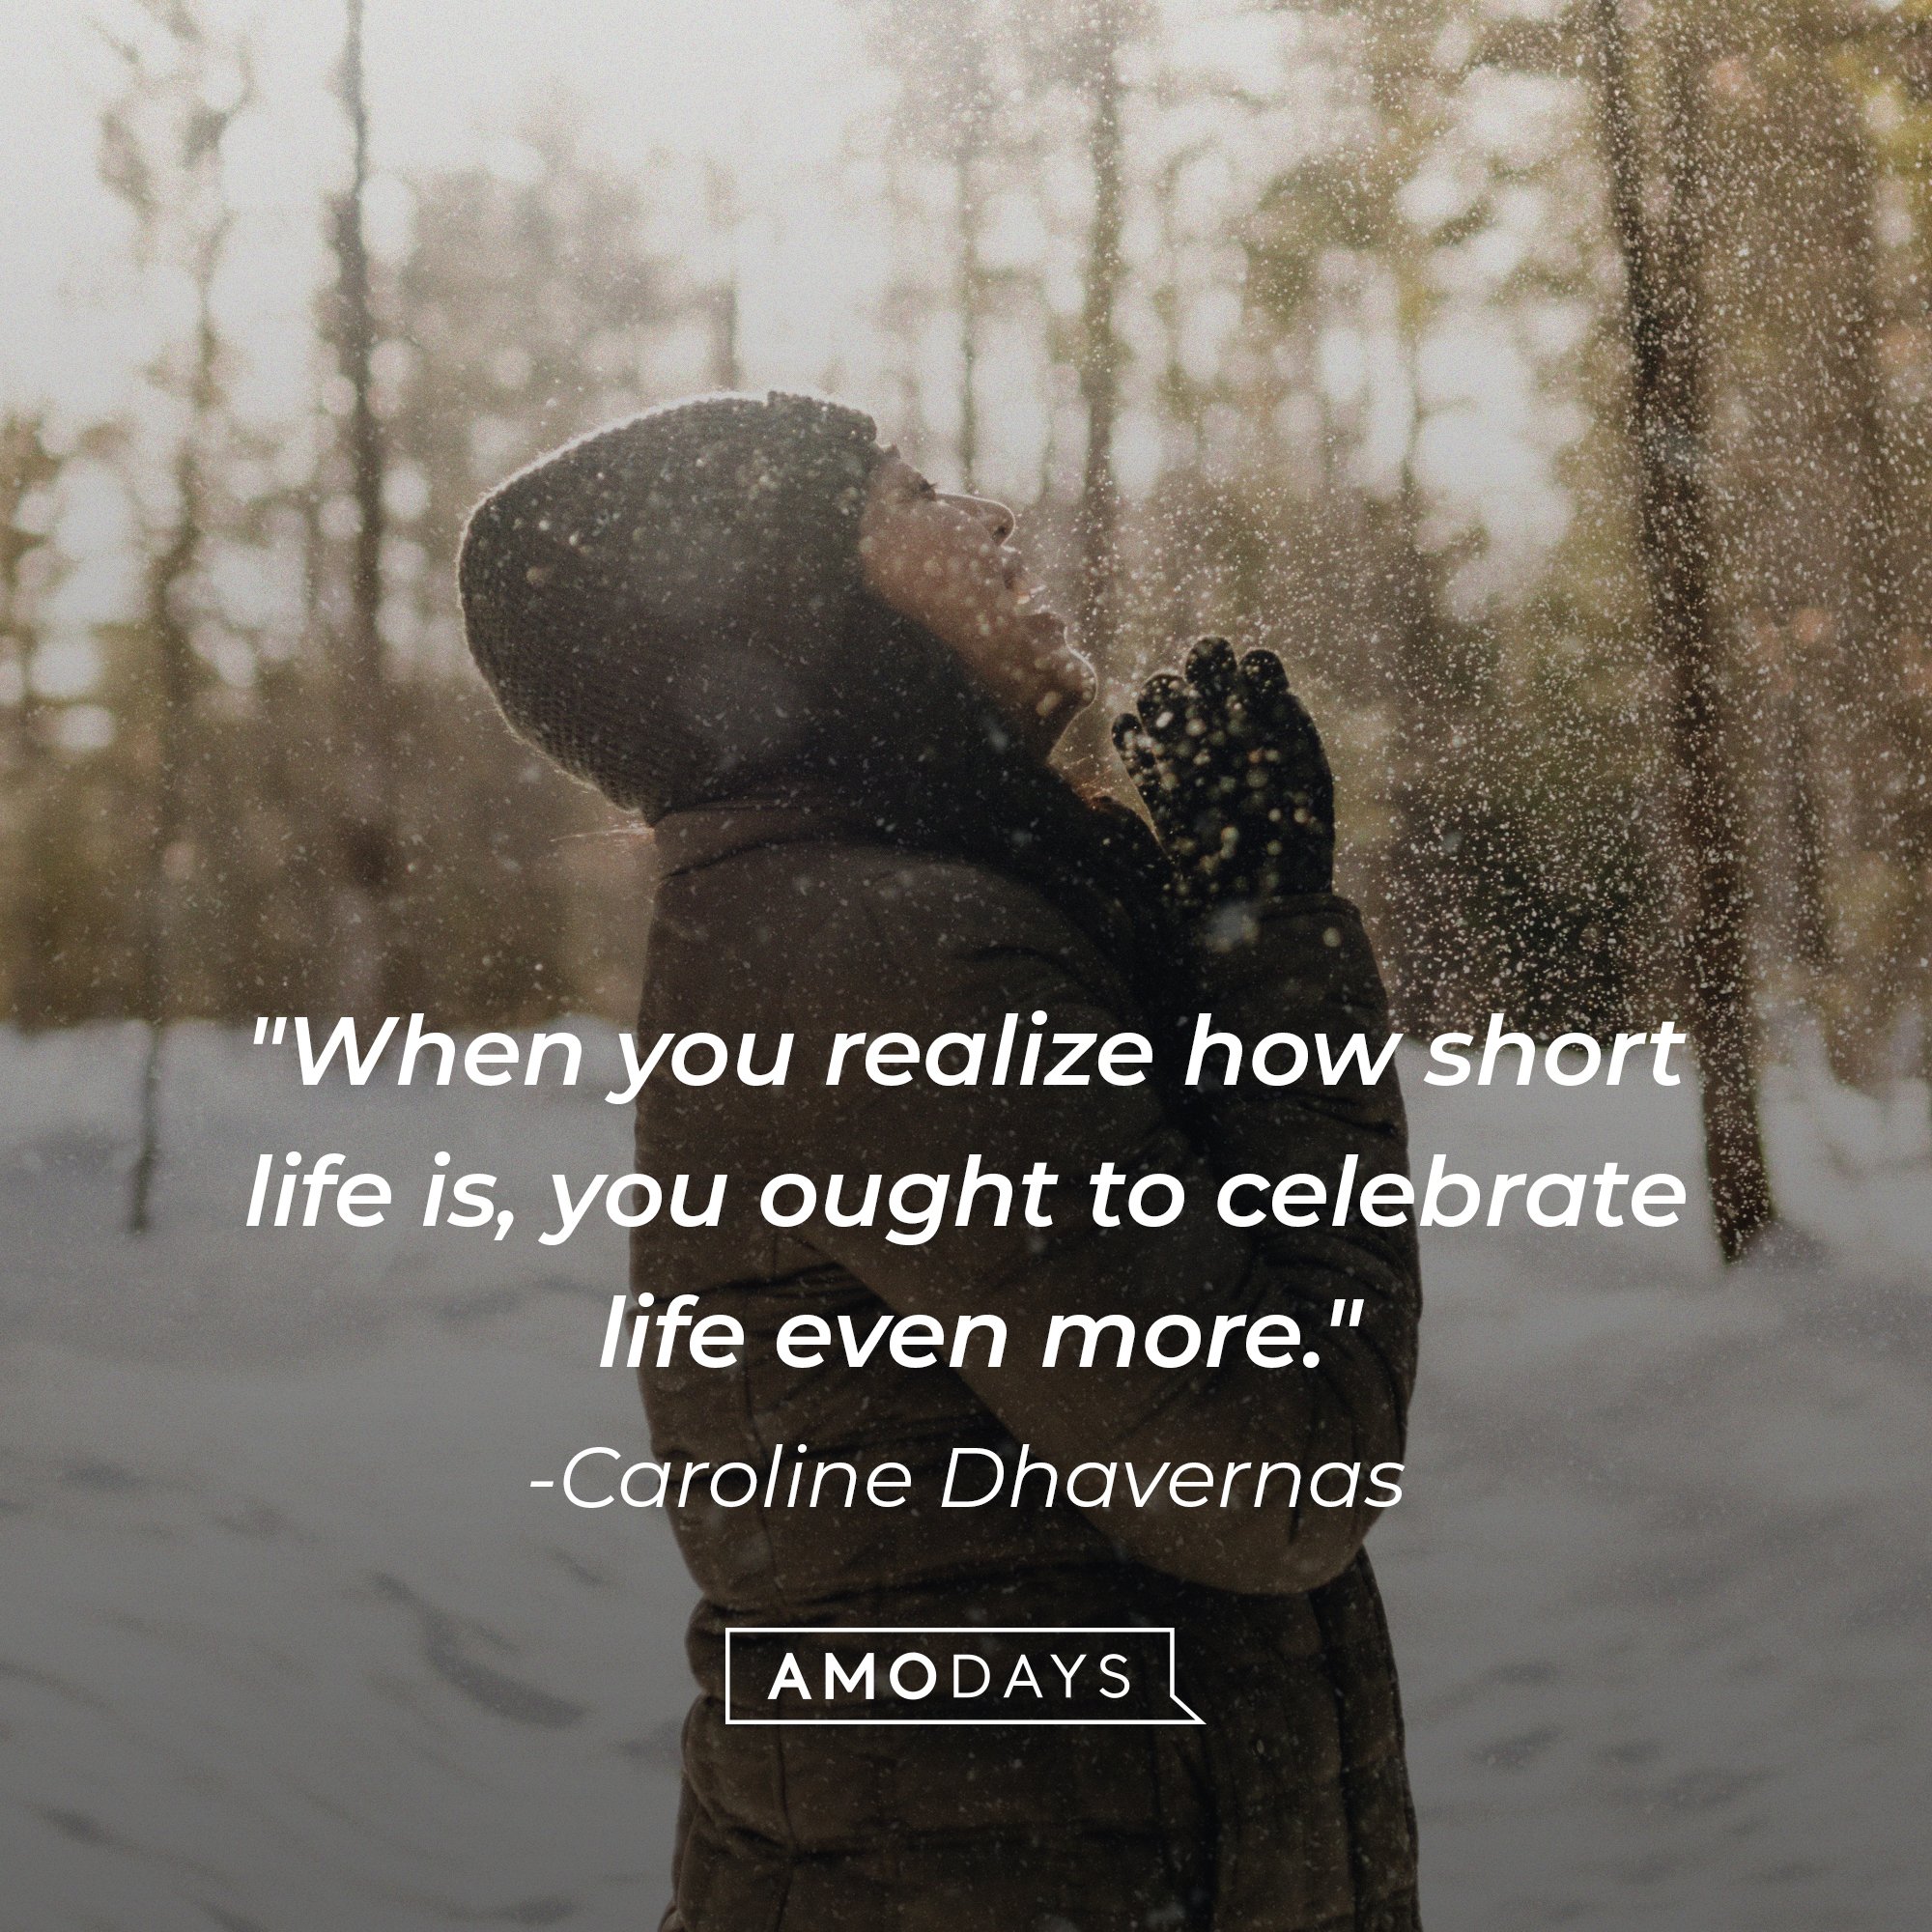 Caroline Dhavernas’ quote: "When you realize how short life is, you ought to celebrate life even more." | Image: AmoDays